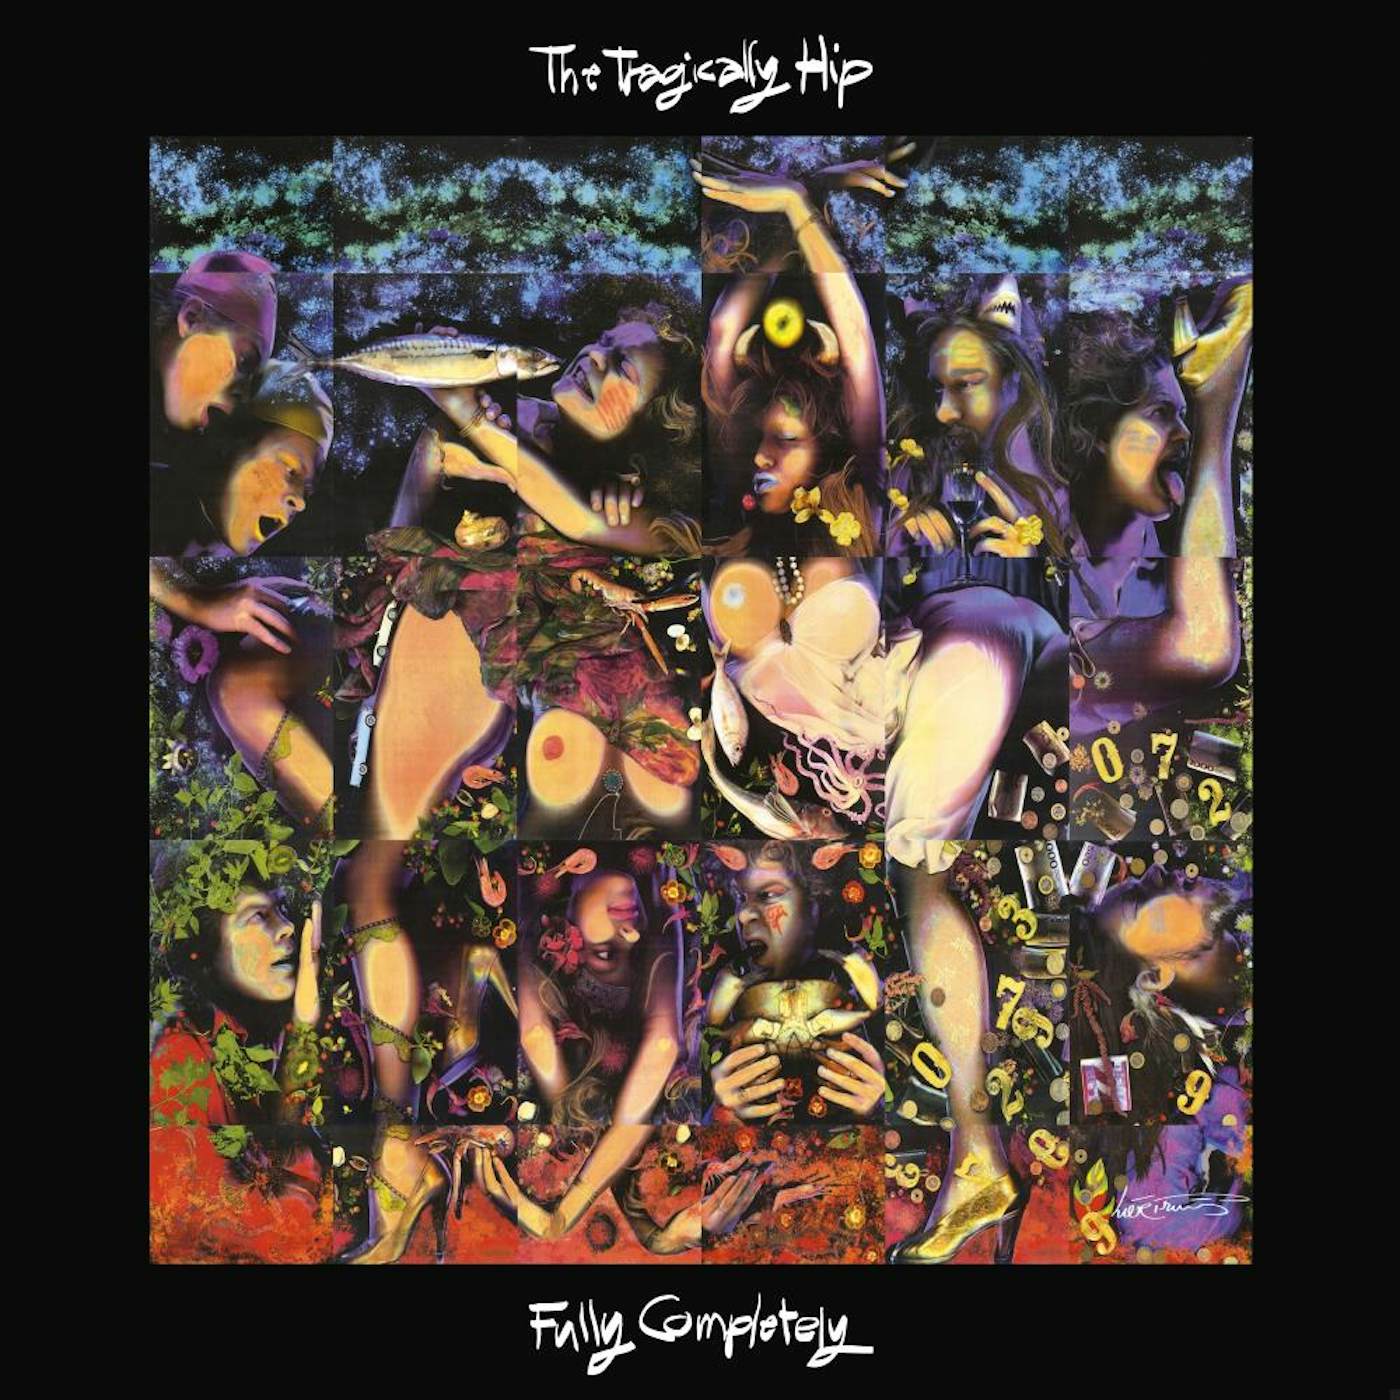 The Tragically Hip Fully Completely (30th Anniversary) Vinyl Record